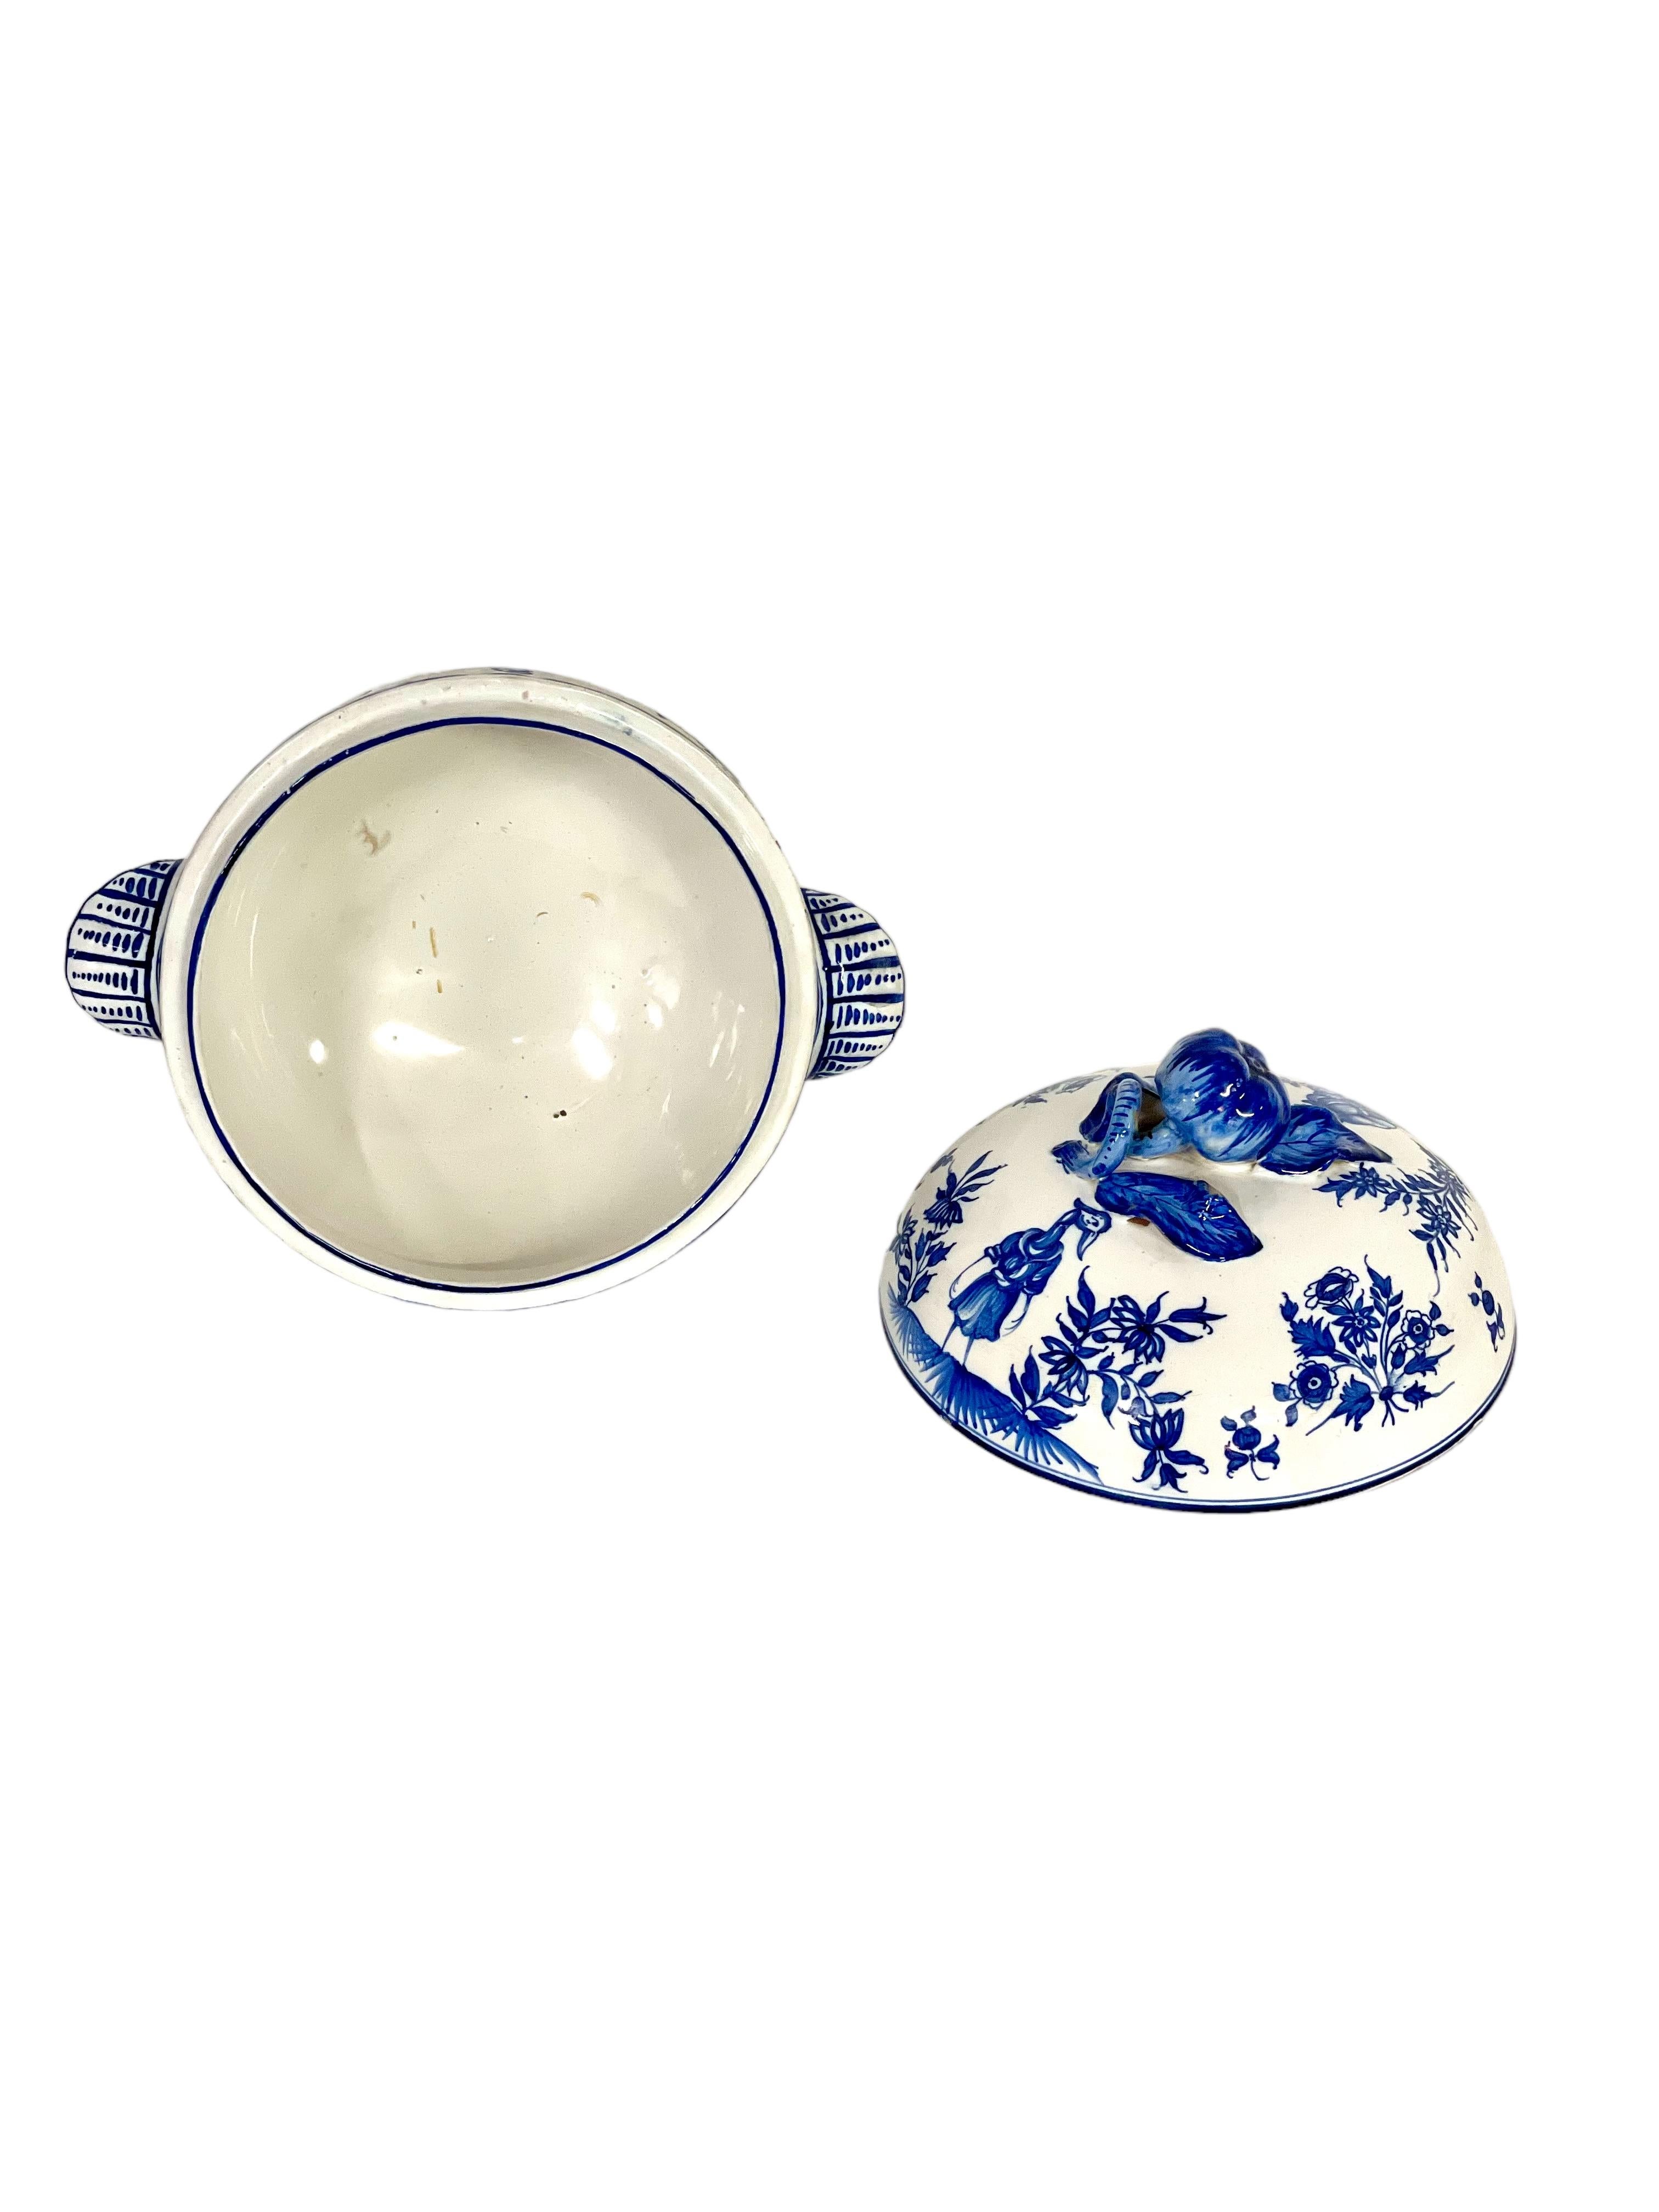 Blue and White Earthenware Lidded Tureen with Fantastical Decoration In Good Condition For Sale In LA CIOTAT, FR